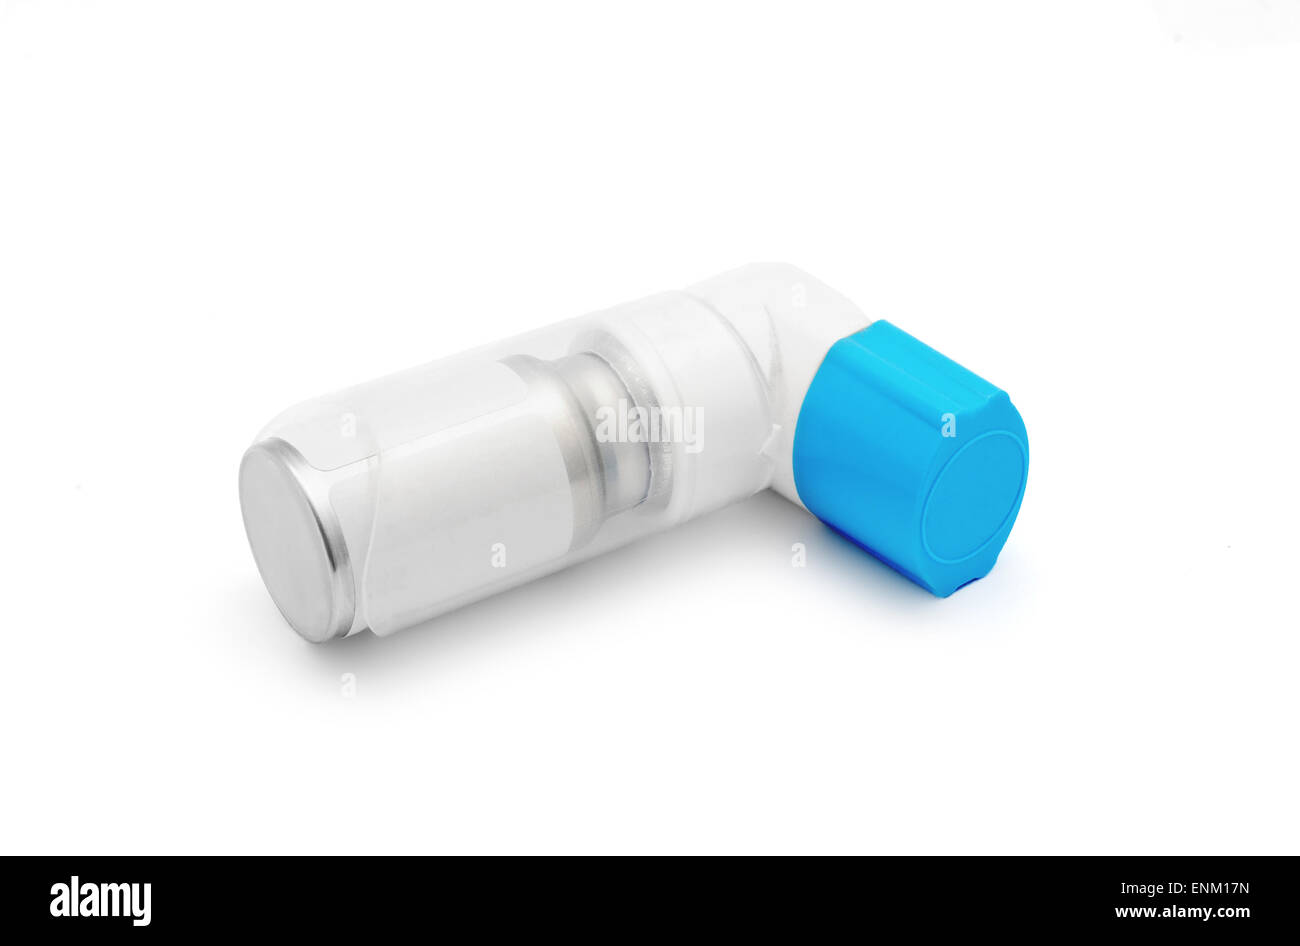 Asthma Inhaler On White Background High Resolution Stock Photography and  Images - Alamy